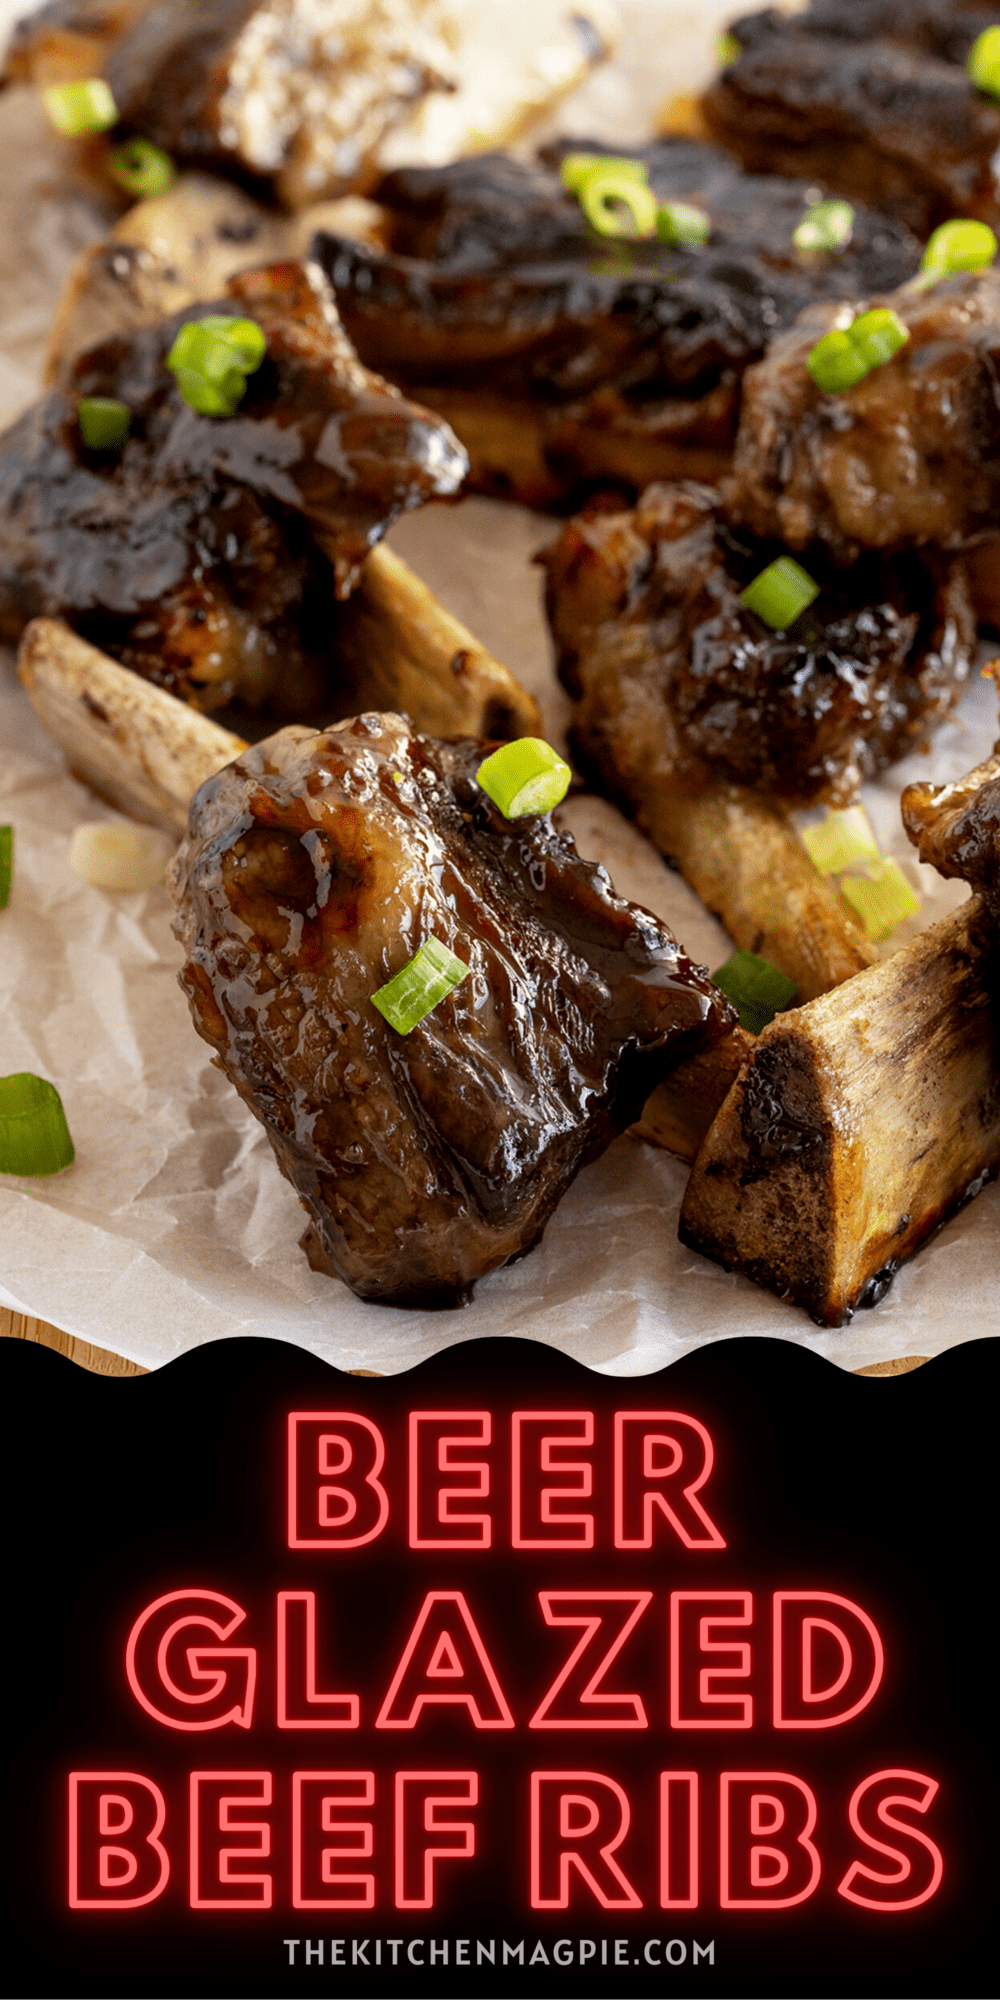 These beer glazed beef ribs have a rich, flavorful glaze and enough time on the grill making them oh so tender!